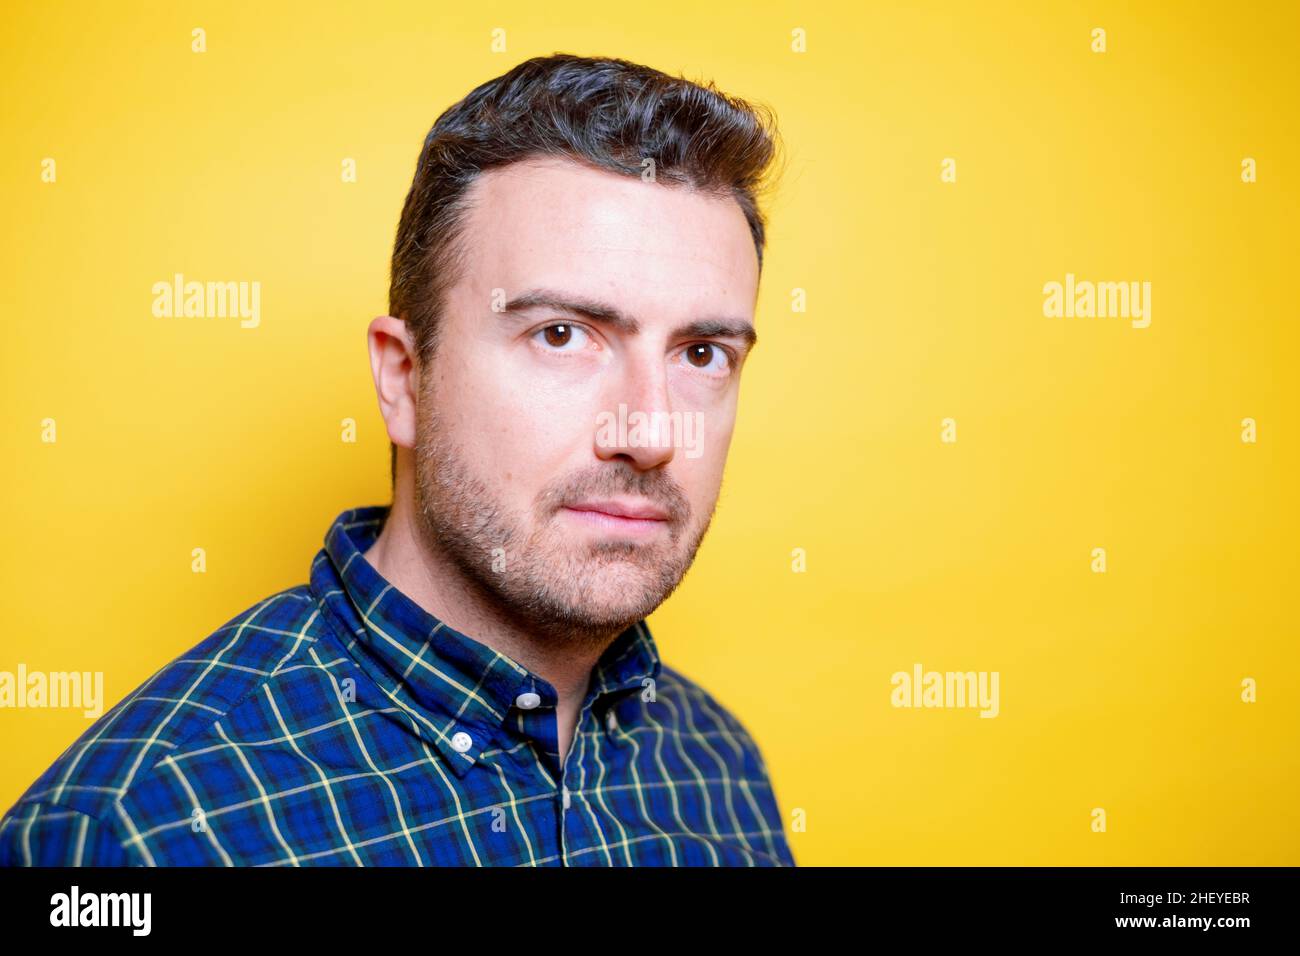 Face portrait of confident adult man on yellow background Stock Photo